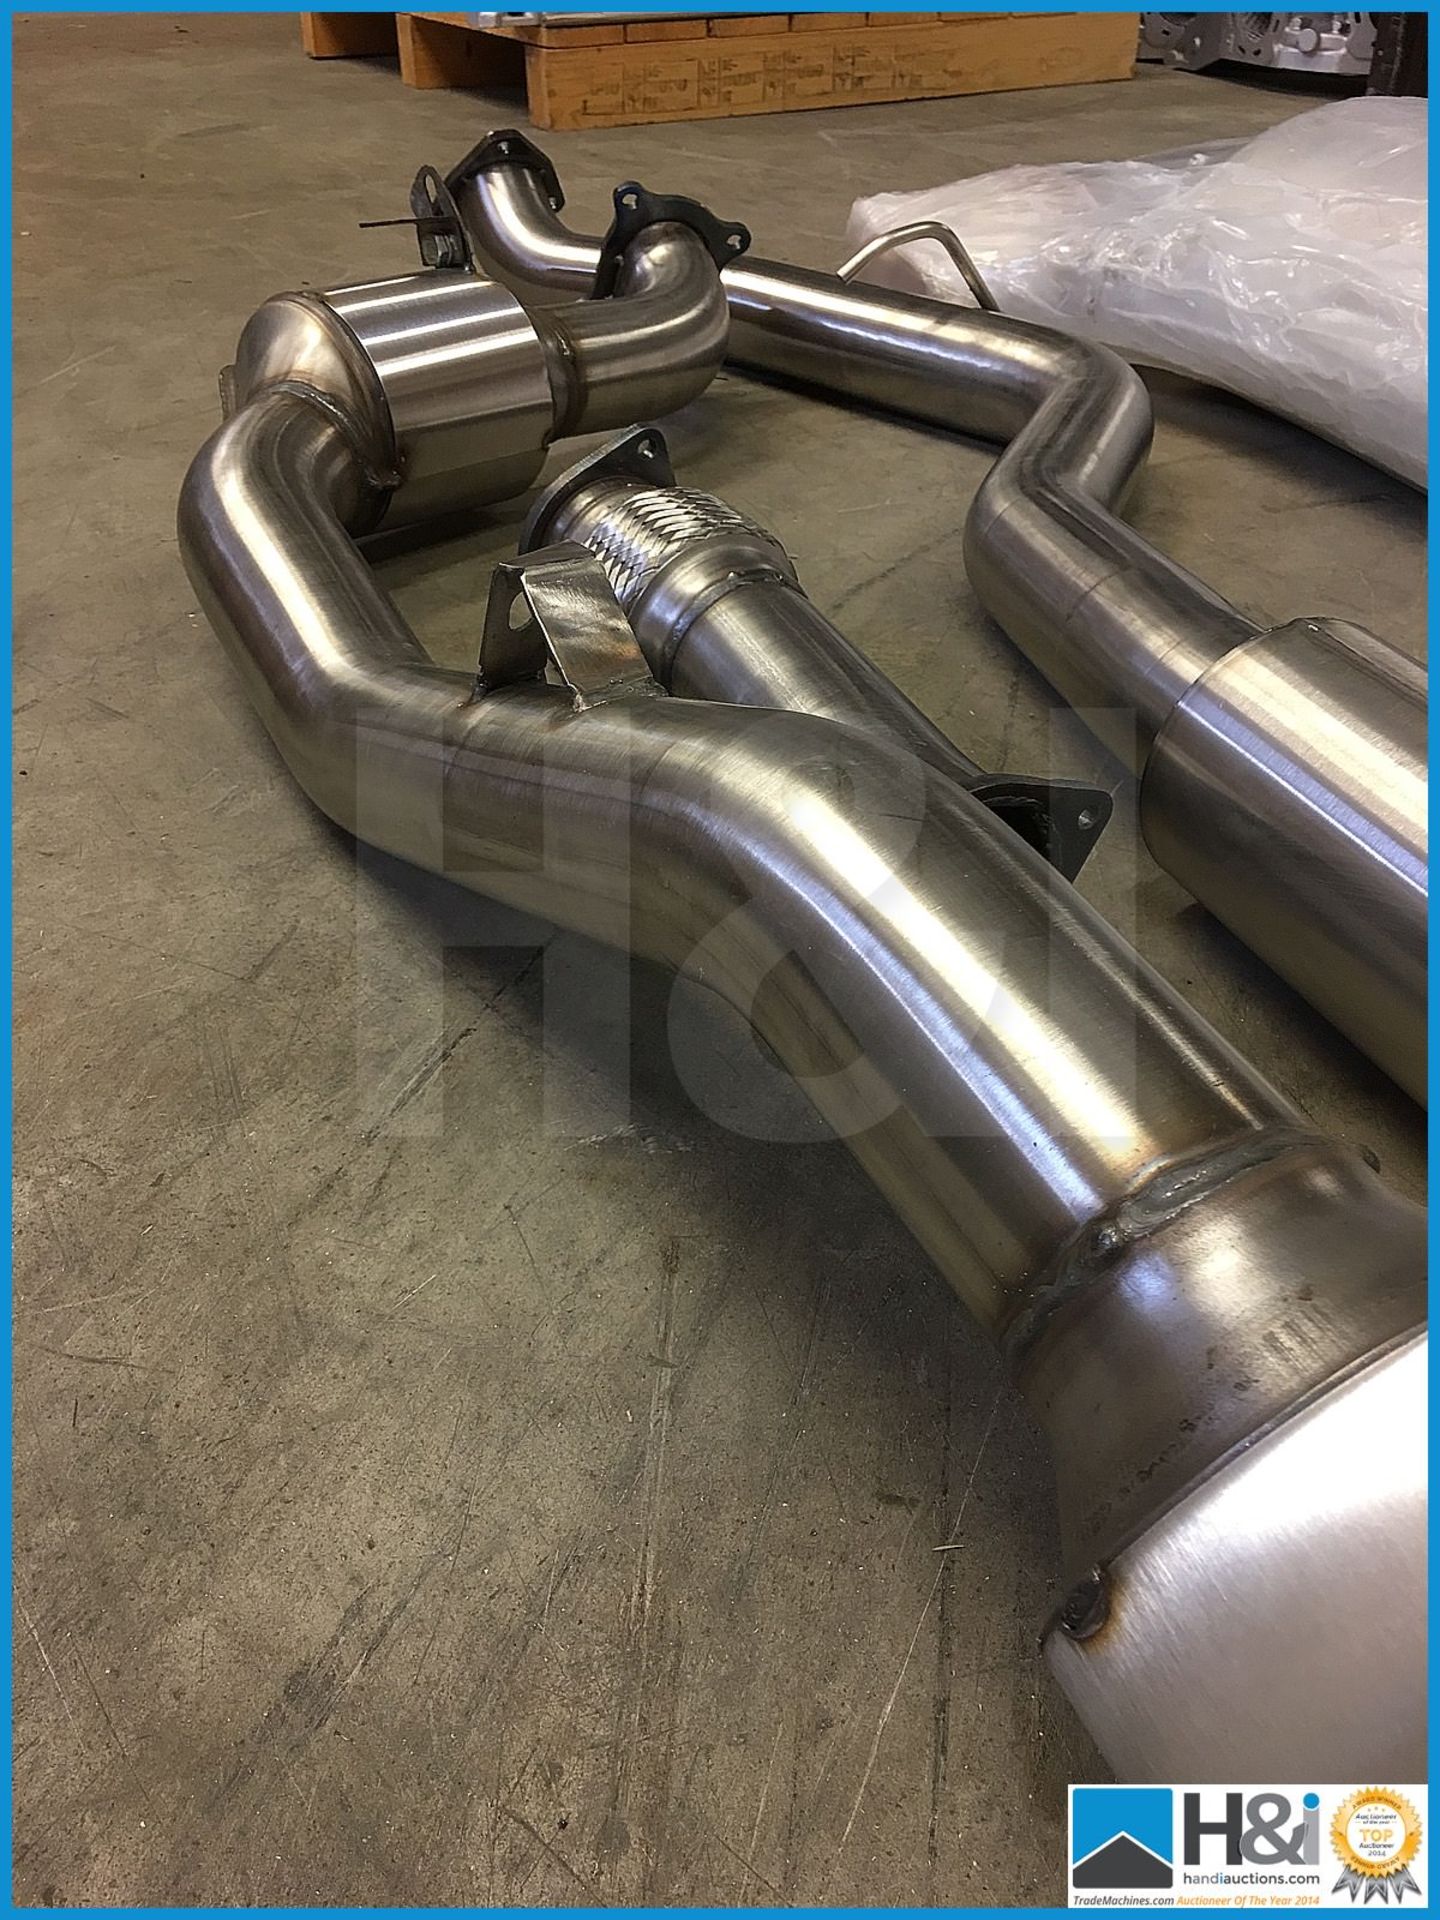 Subaru Cosworth CS400 compete exhaust system. This is only one of 8 systems available in the world. - Image 3 of 6